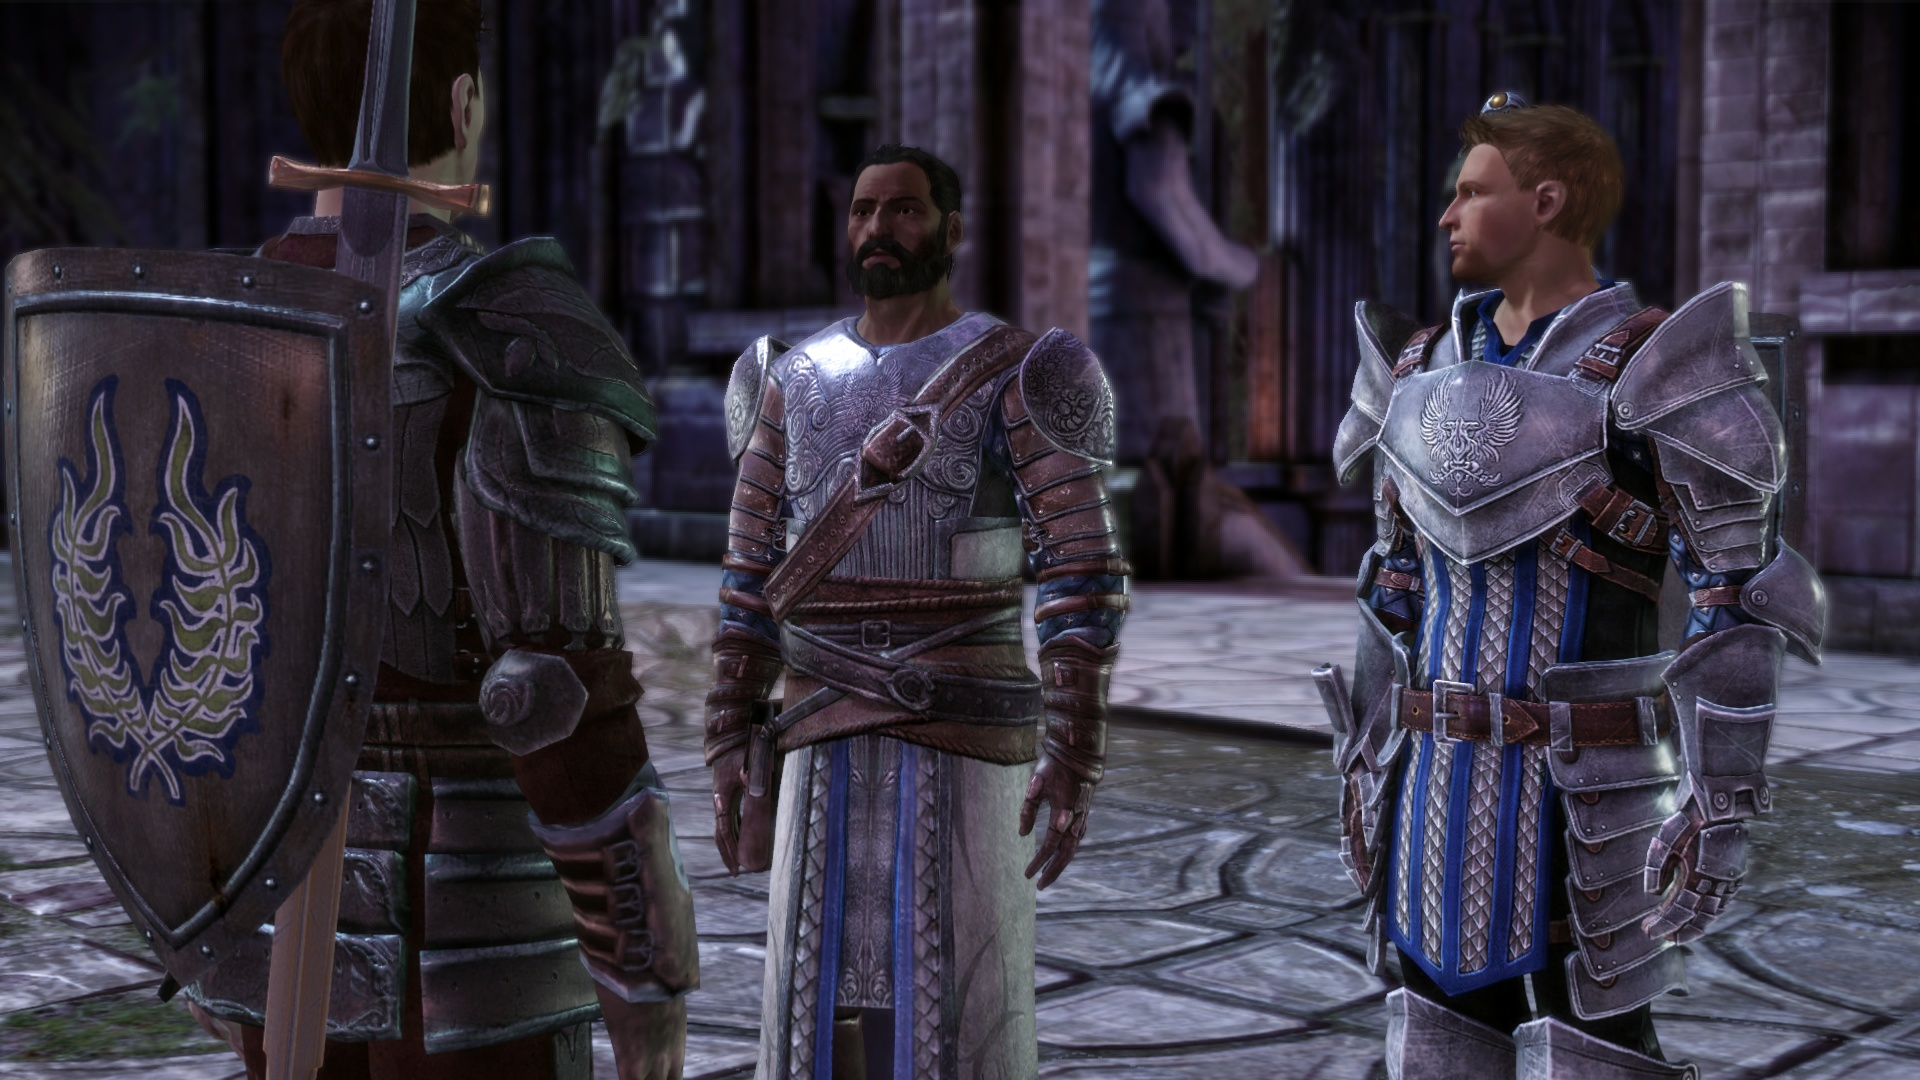 Mod Corner: Dragon Age Invades Skyrim With These BioWare-Inspired